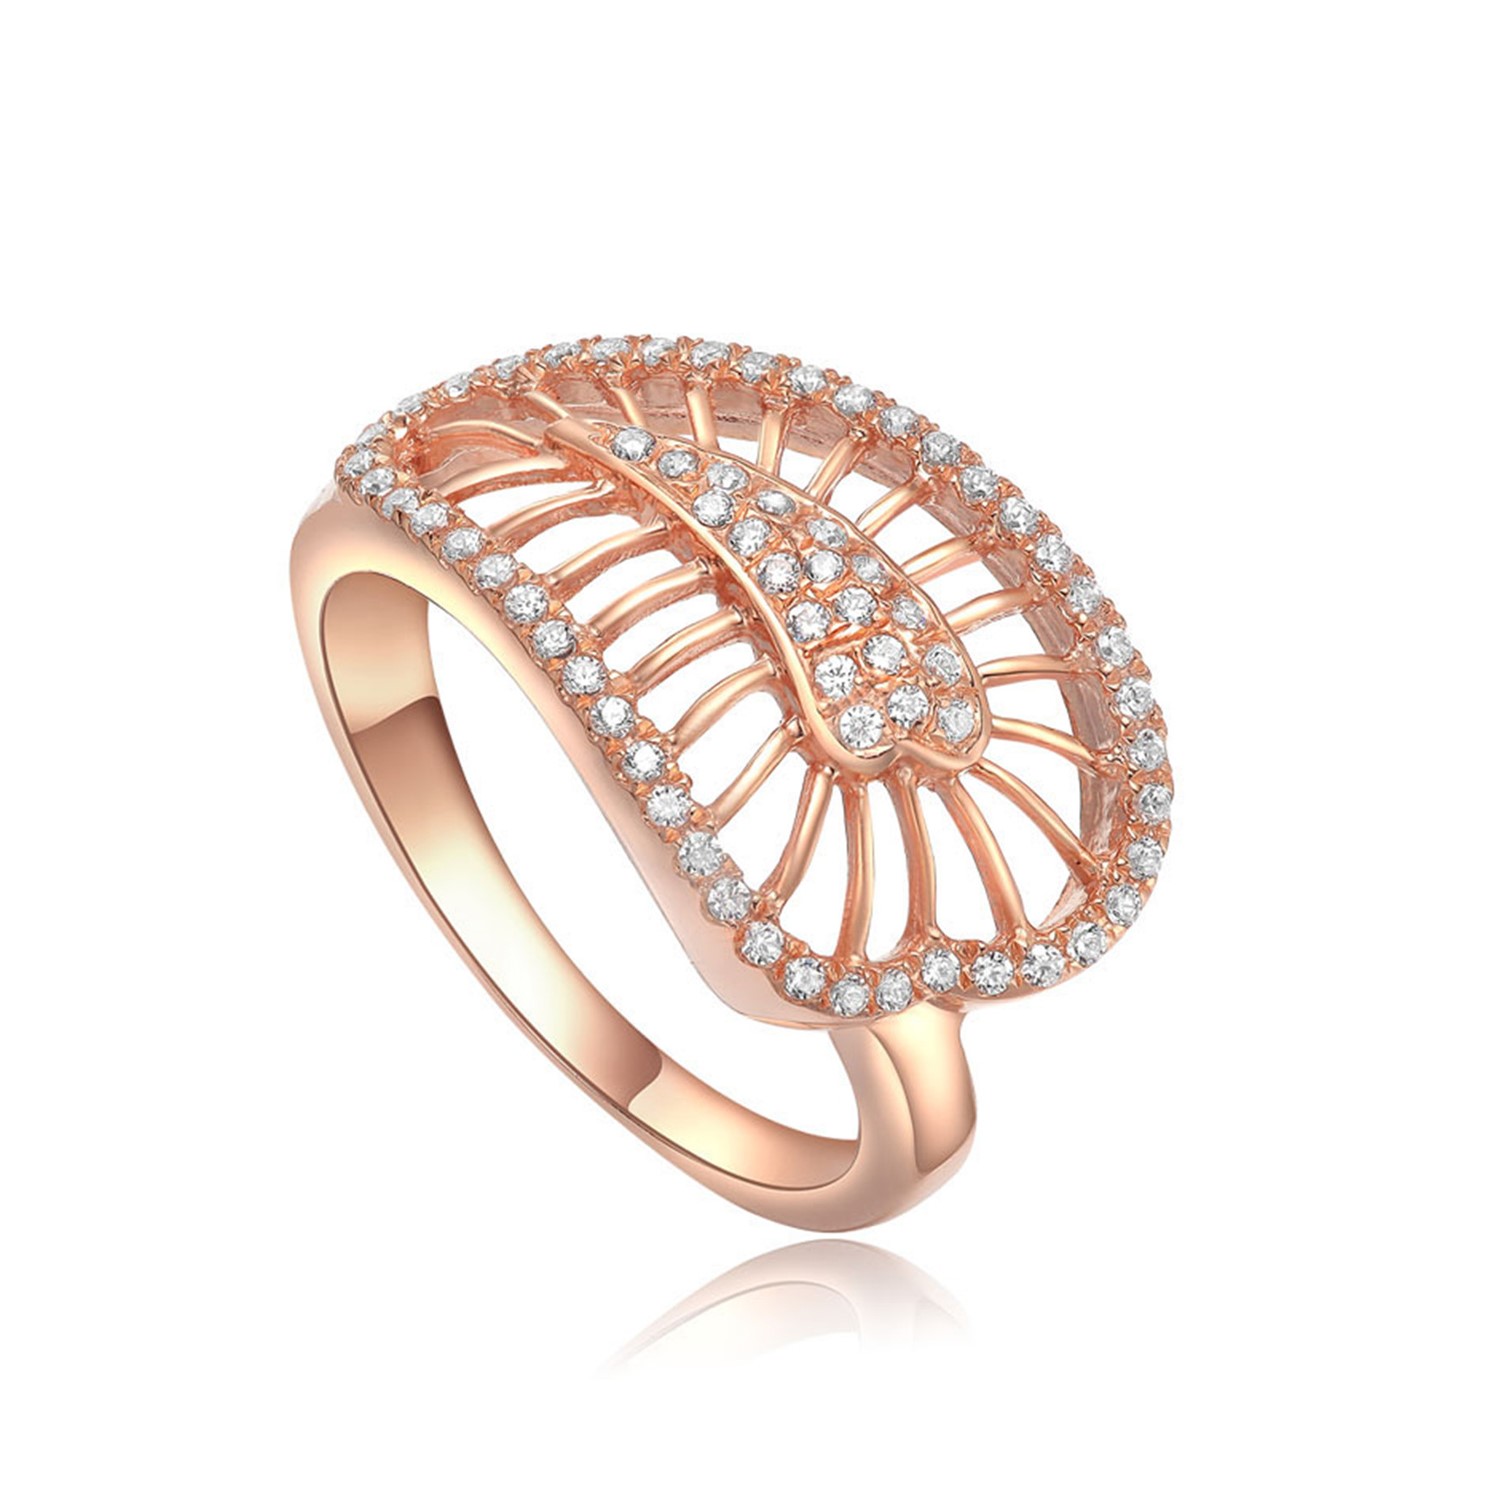 High quality new design ring rose gold plated cubic zirconia ladies jewellery 925 sterling silver ring